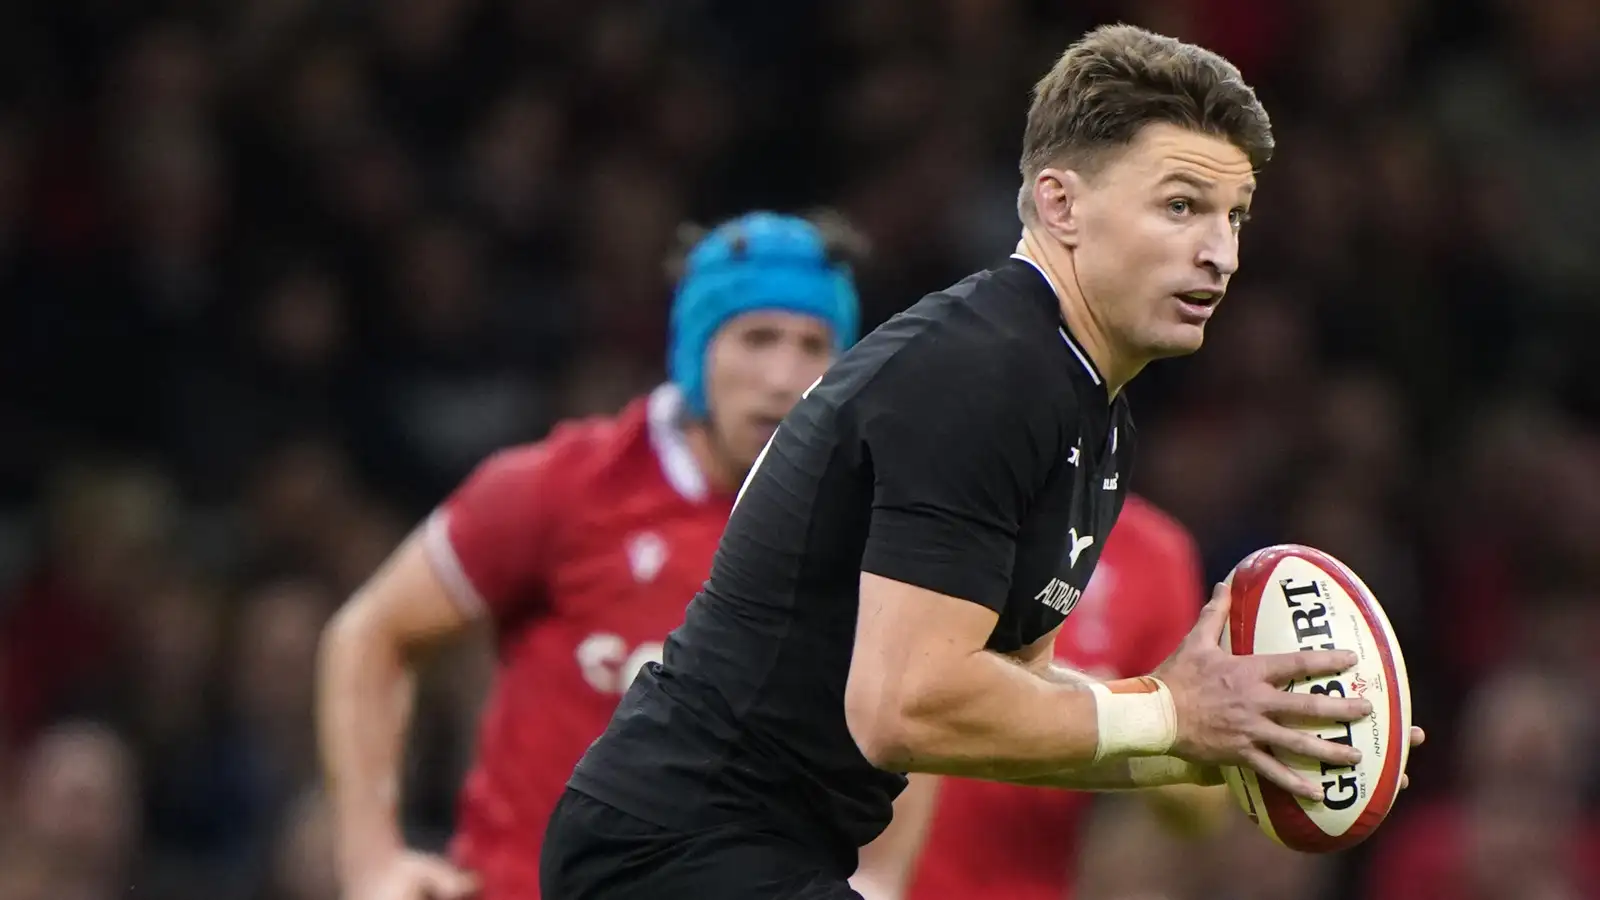 All Blacks: Beauden Barrett starts at fly-half with Mark Telea set to make debut on the wing